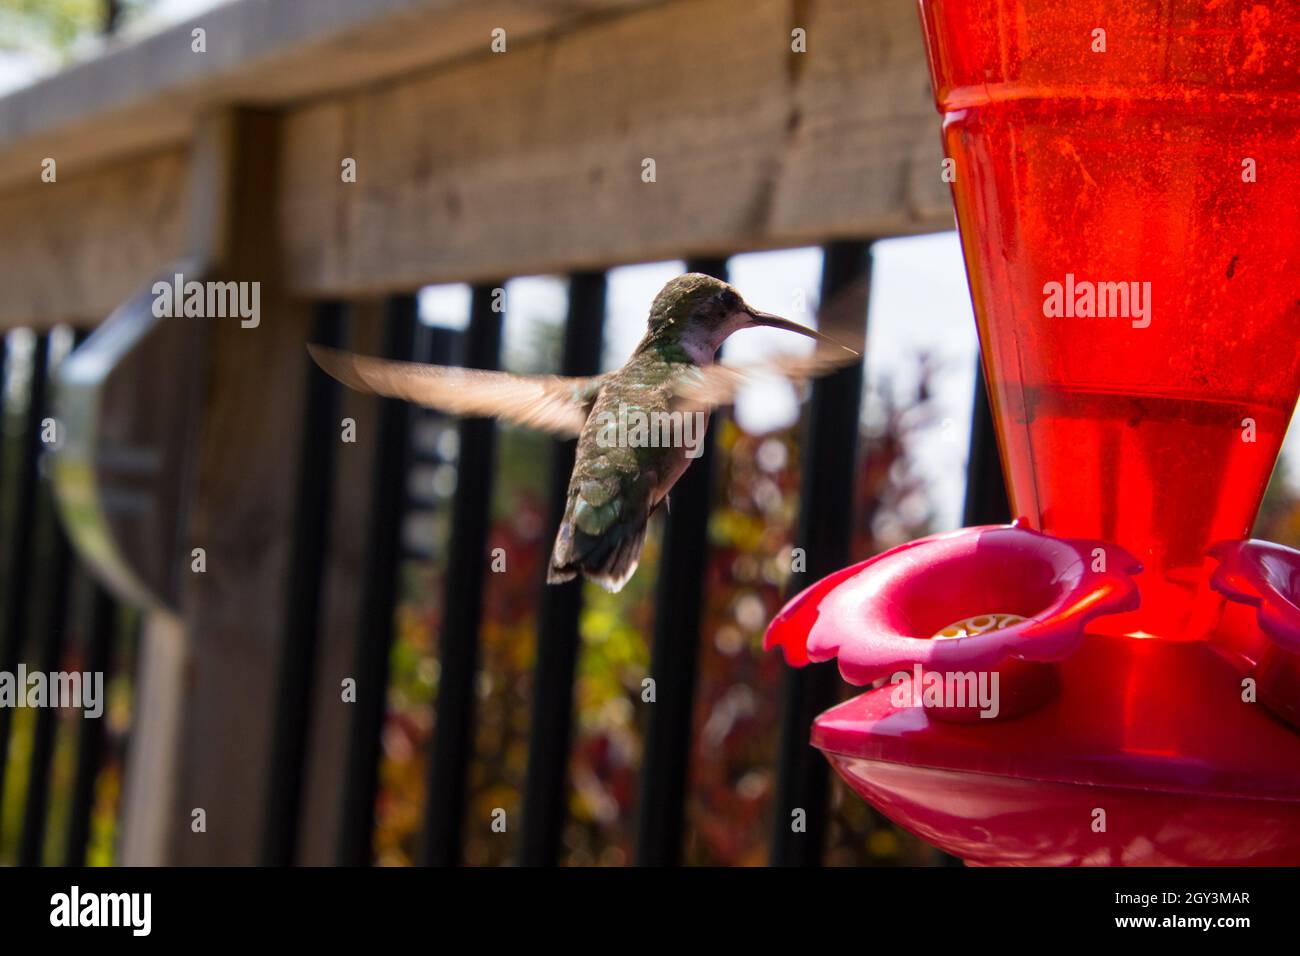 An Anna's hummingbird hovering in front of a red plastic feeder Stock Photo